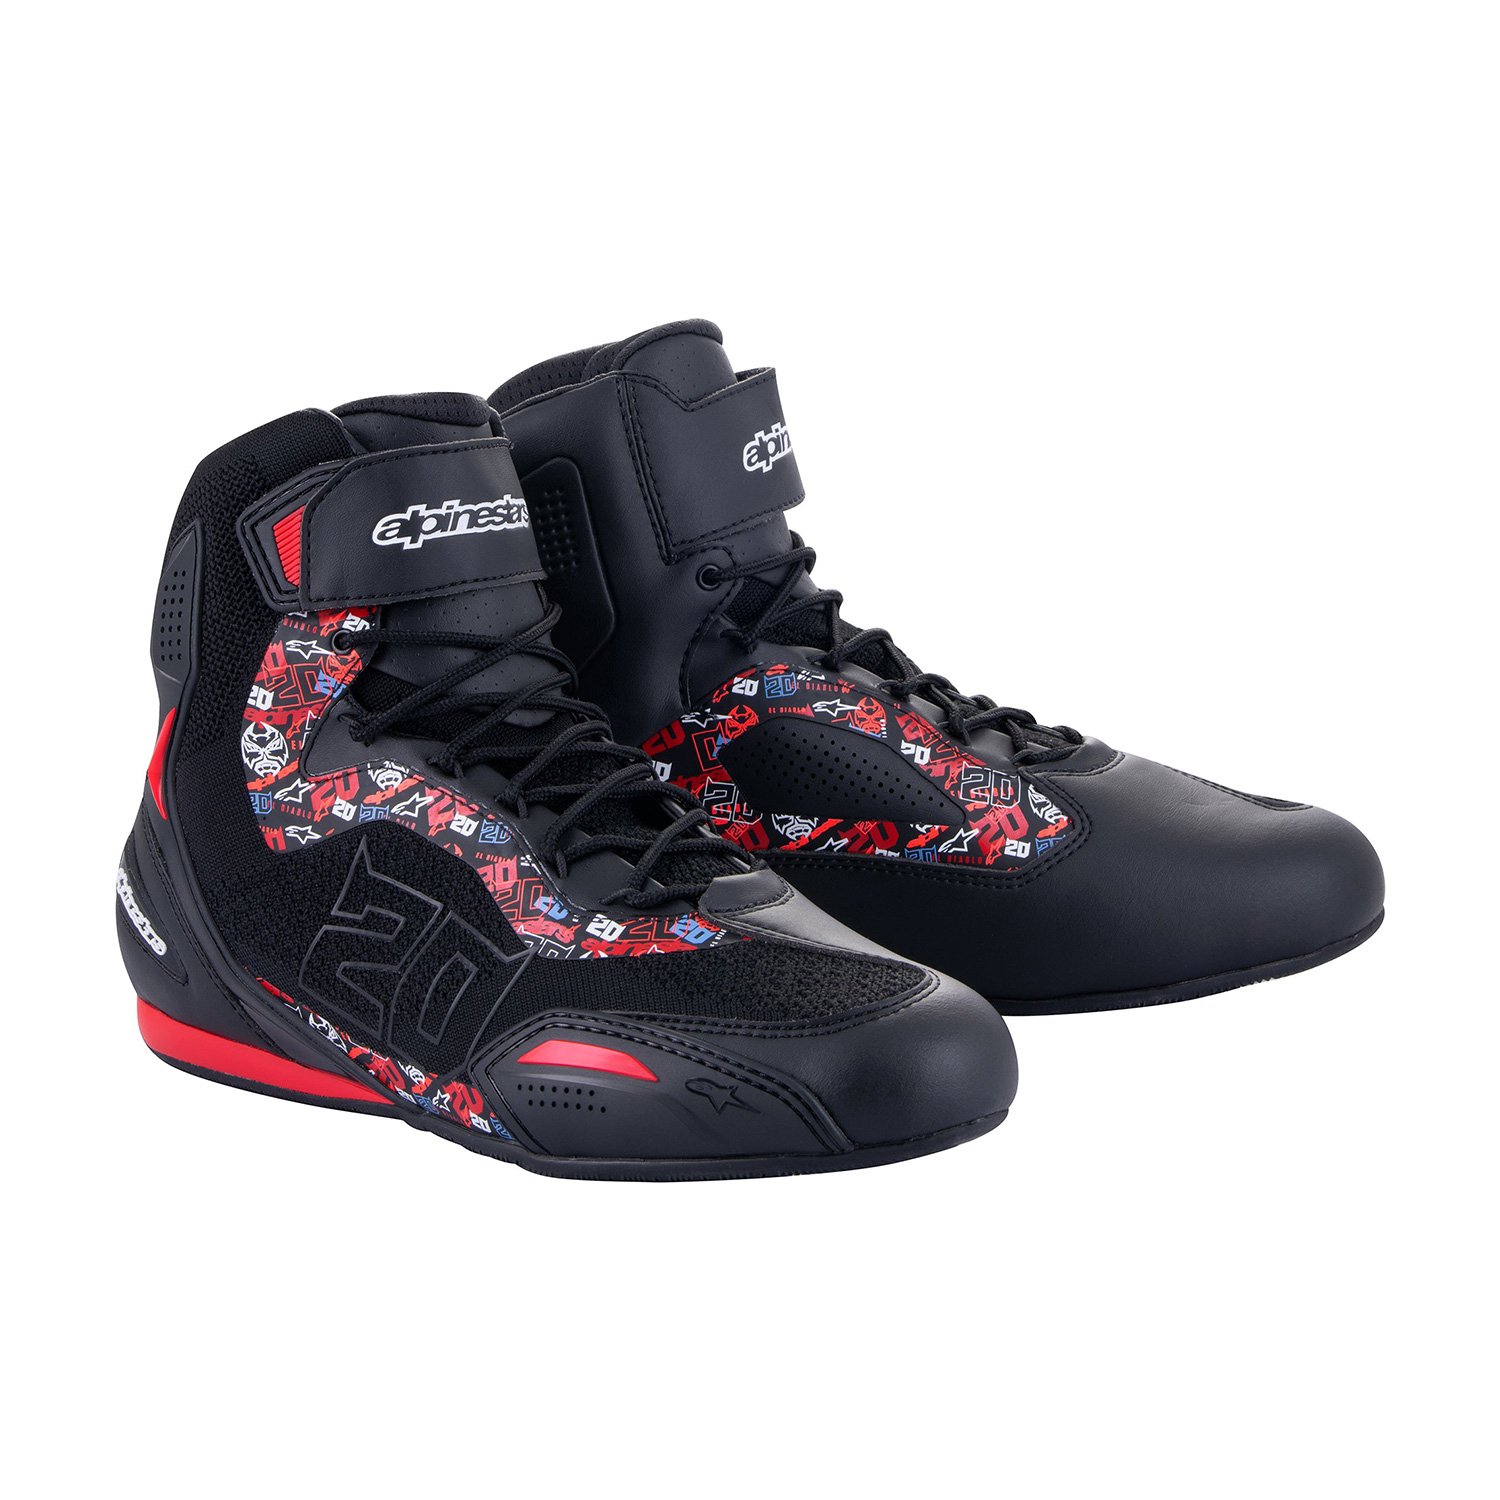 Image of EU Alpinestars FQ20 Faster-3 Rideknit Noir Bright Rouge Chaussures Taille US 85